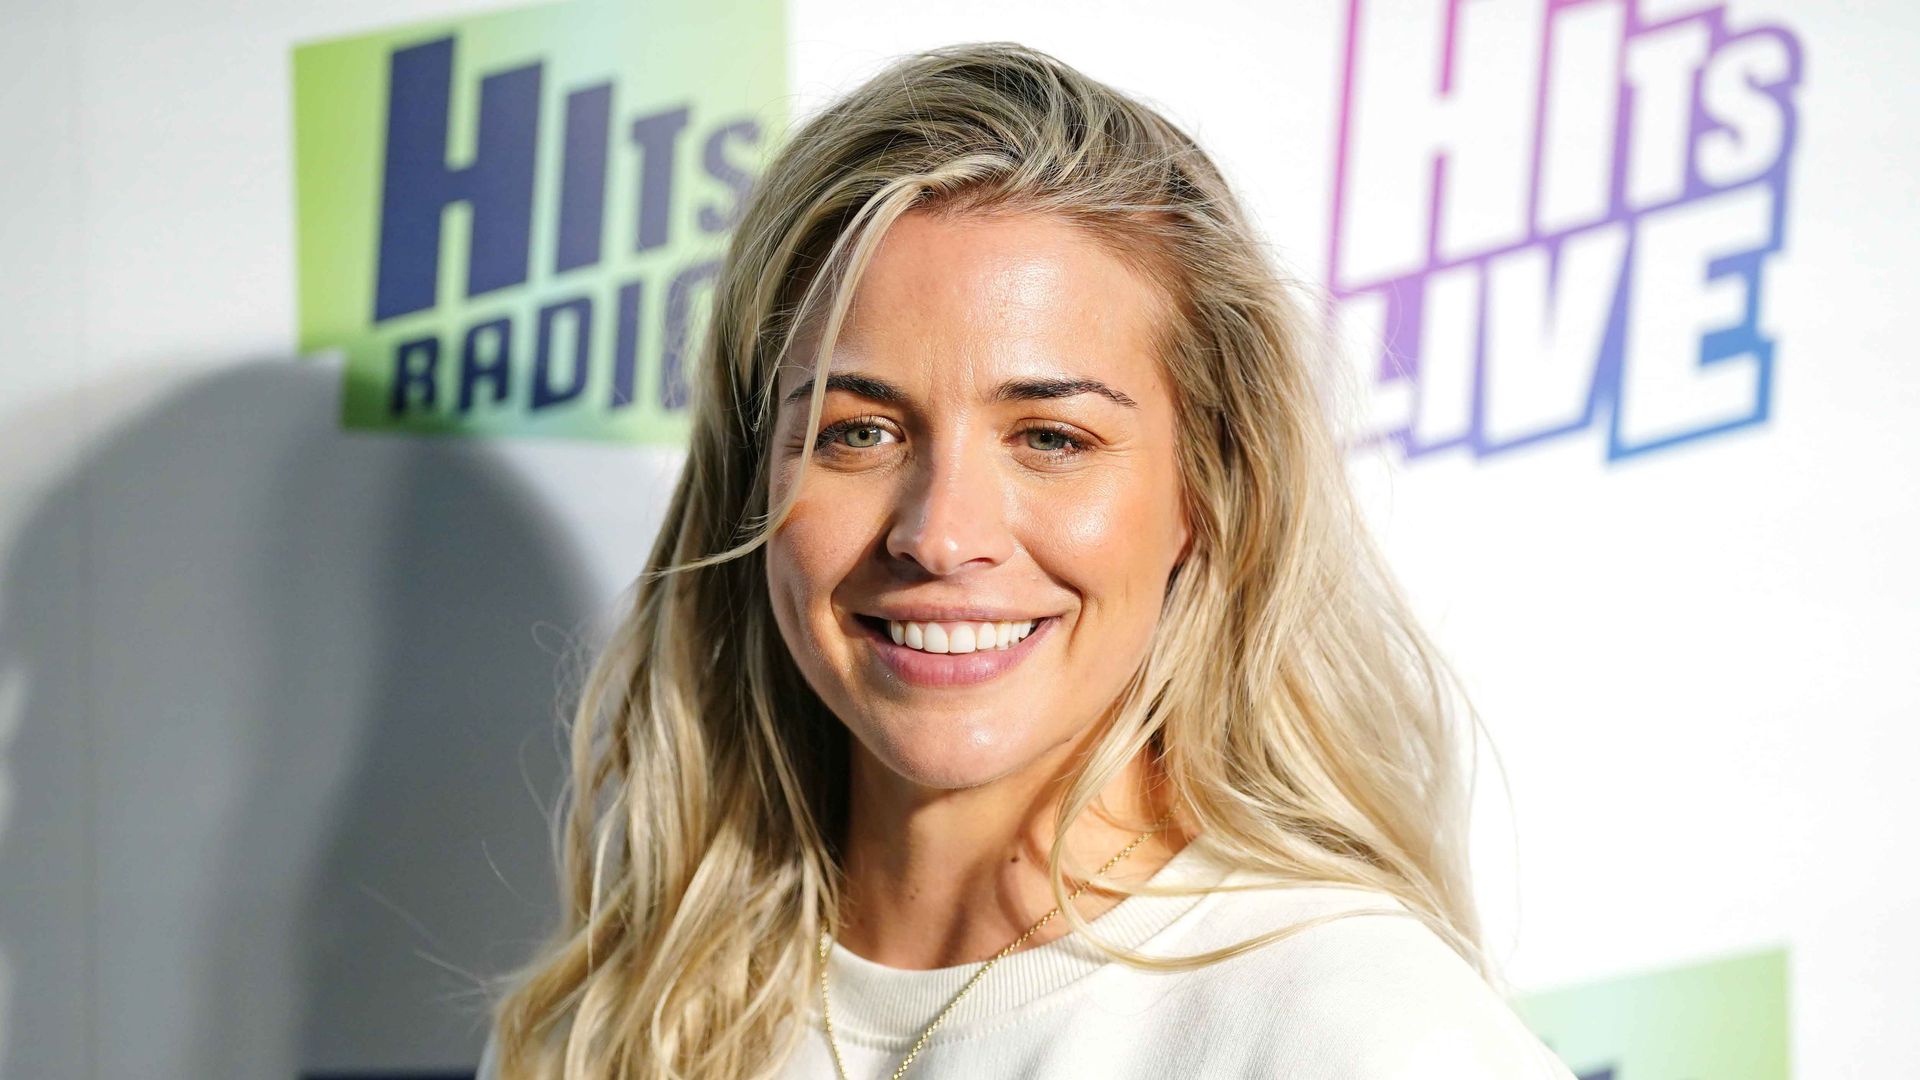 Gemma Atkinson attends HITS Radio Live Manchester at AO Arena on November 11 2022 in Manchester